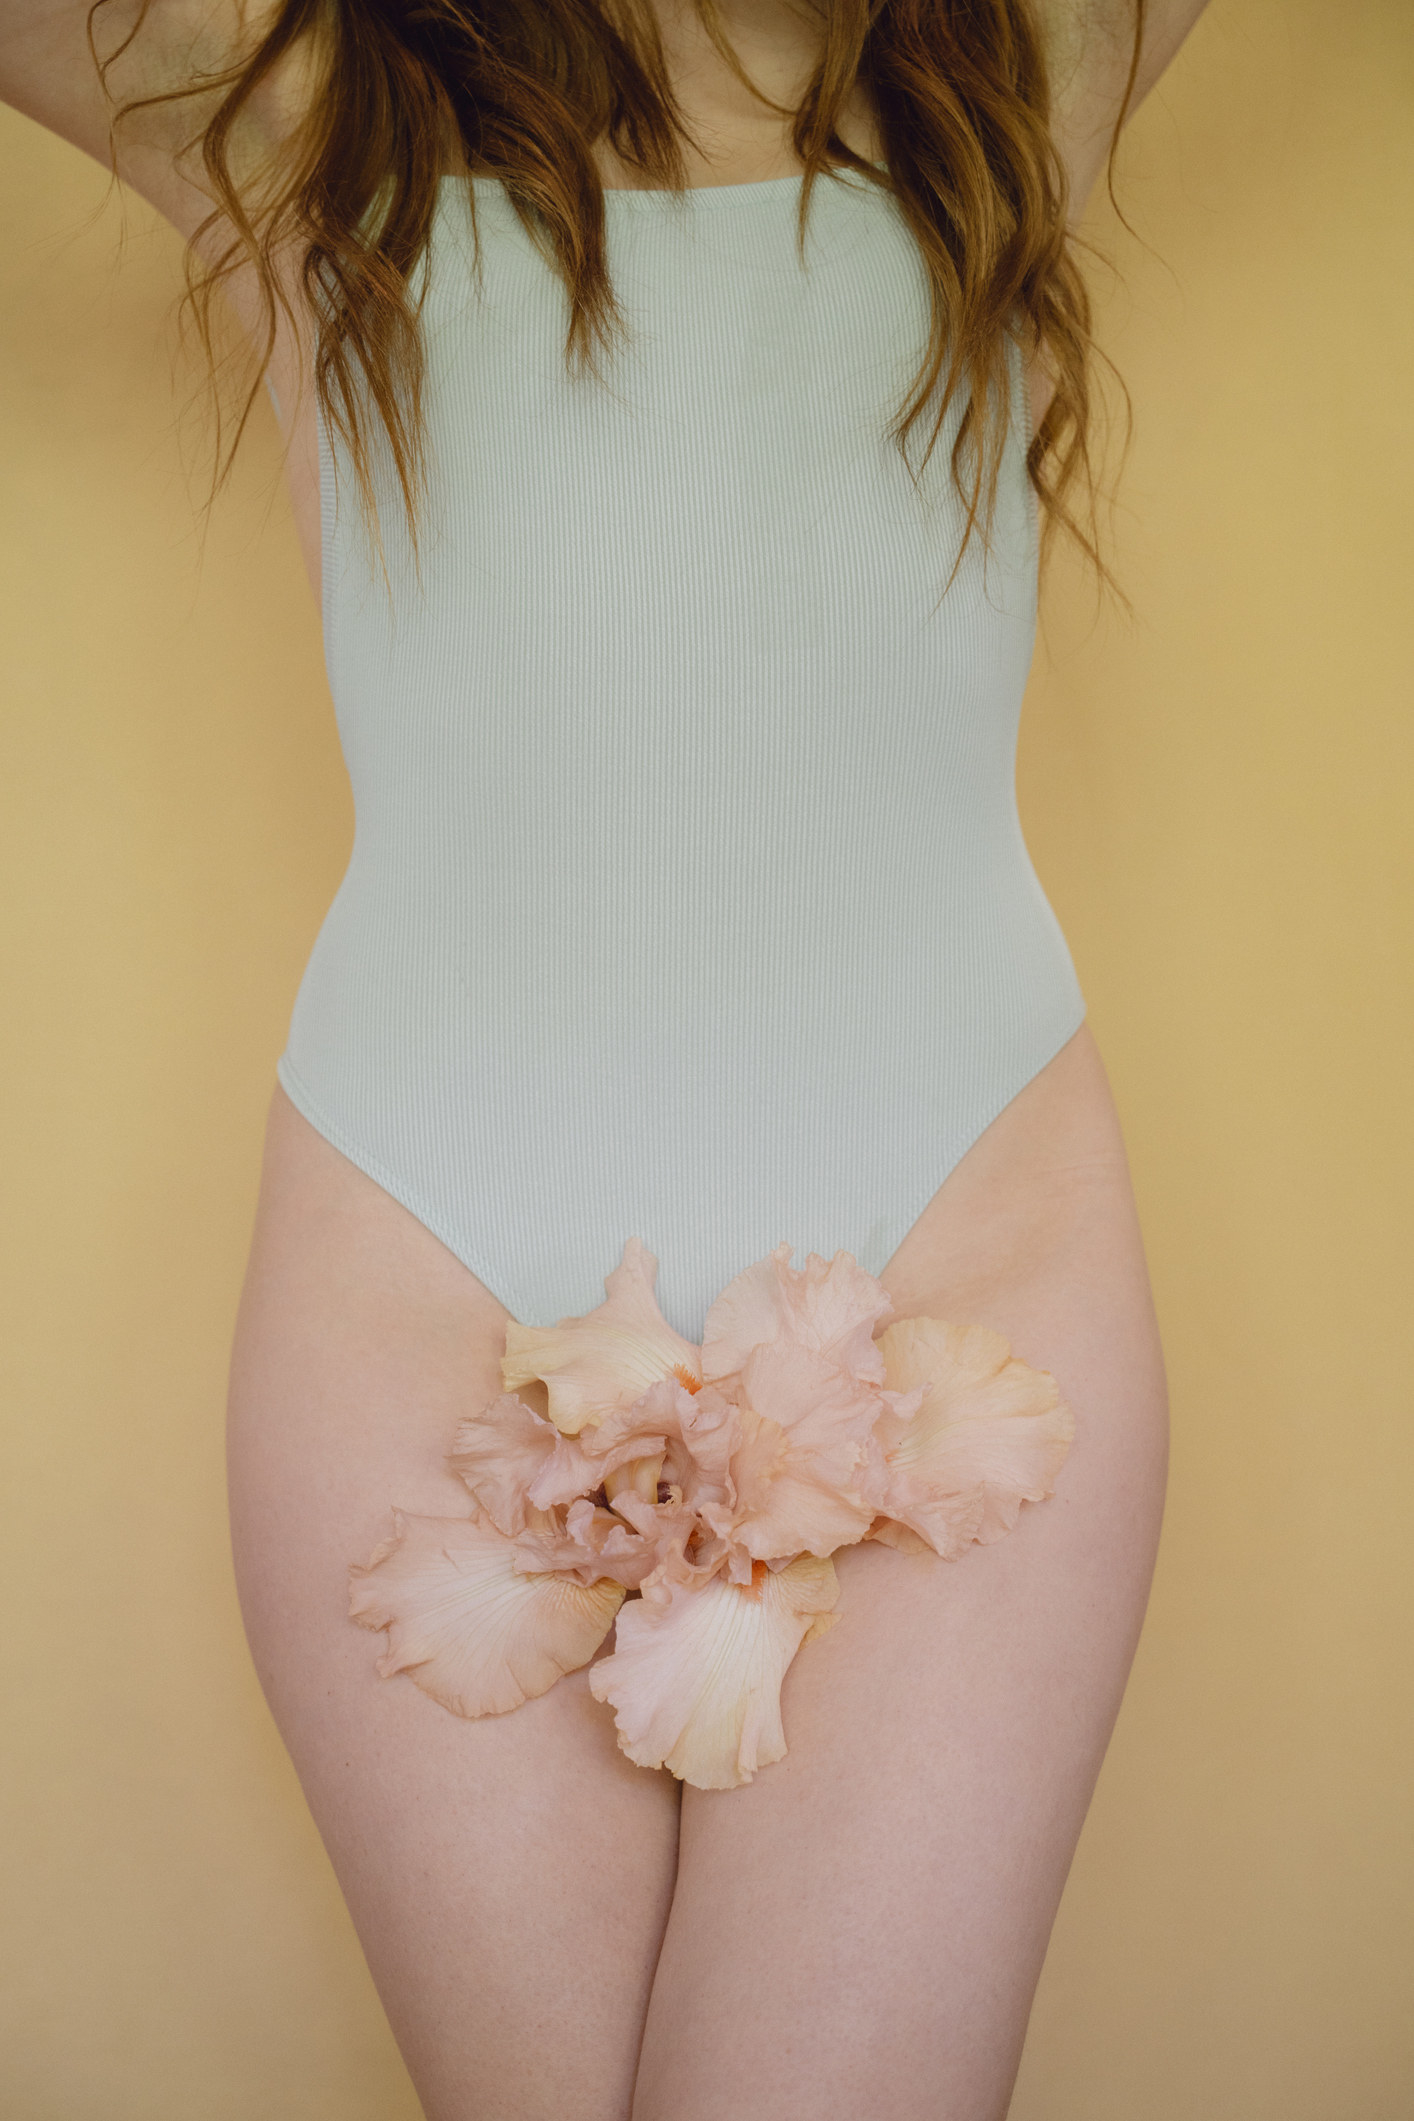 Young woman with pink flower wearing pastel blue swiming suit